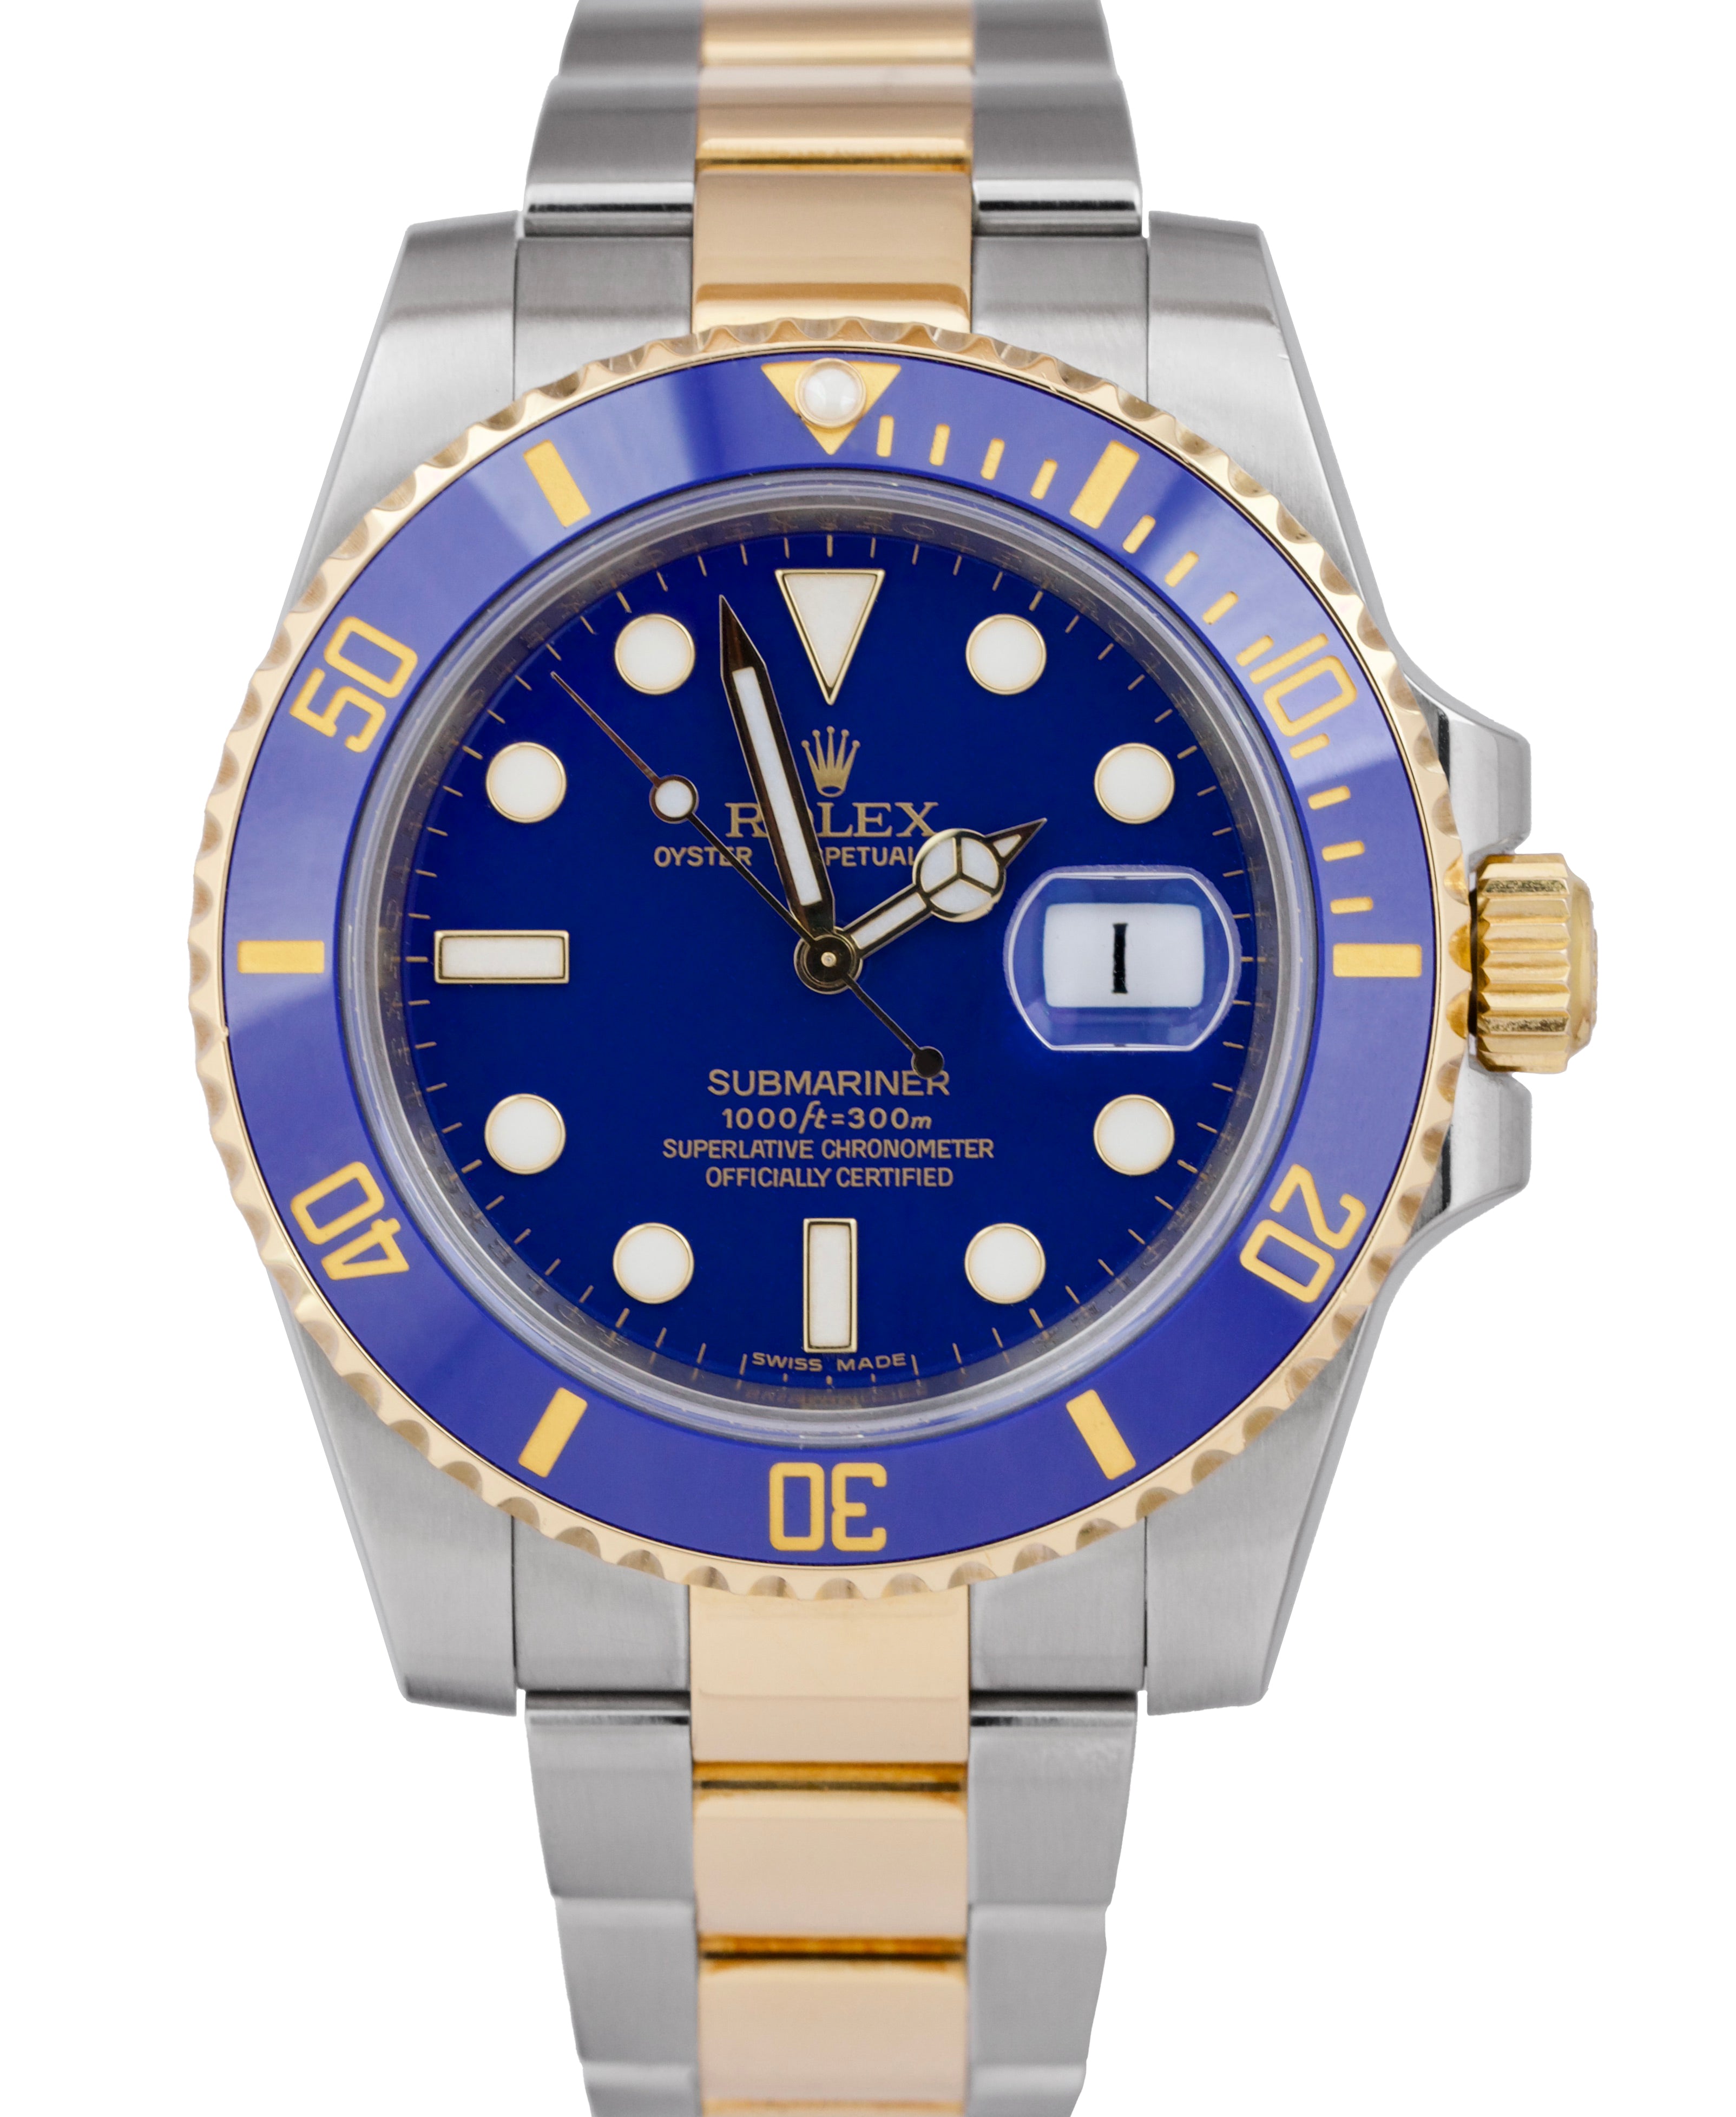 Rolex Submariner Date Ceramic Two-Tone Gold Steel Blue Automatic Watch 116613 LB